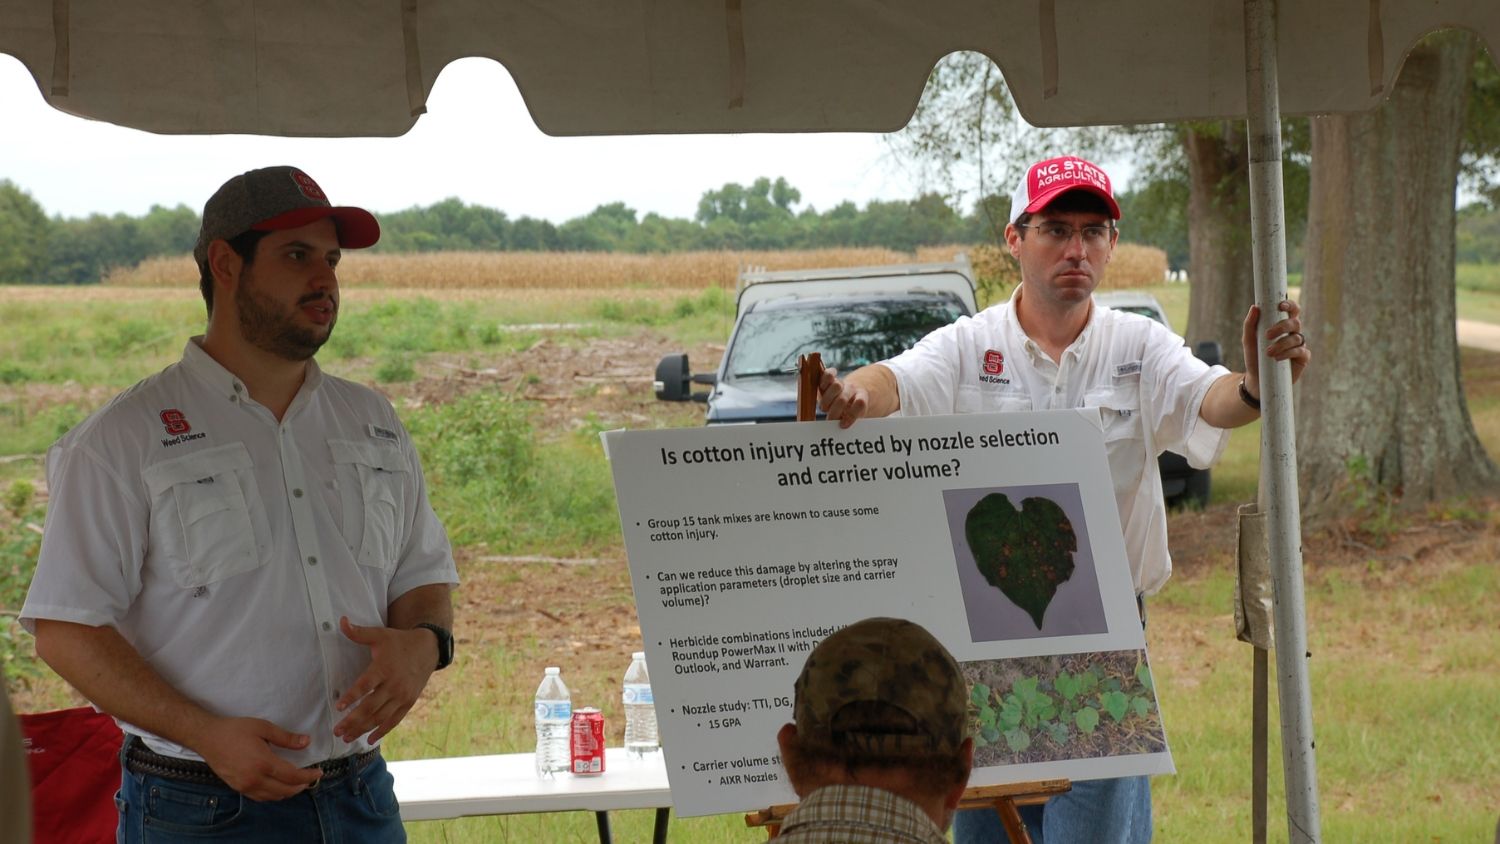 NC State weed science students present at a cotton field day